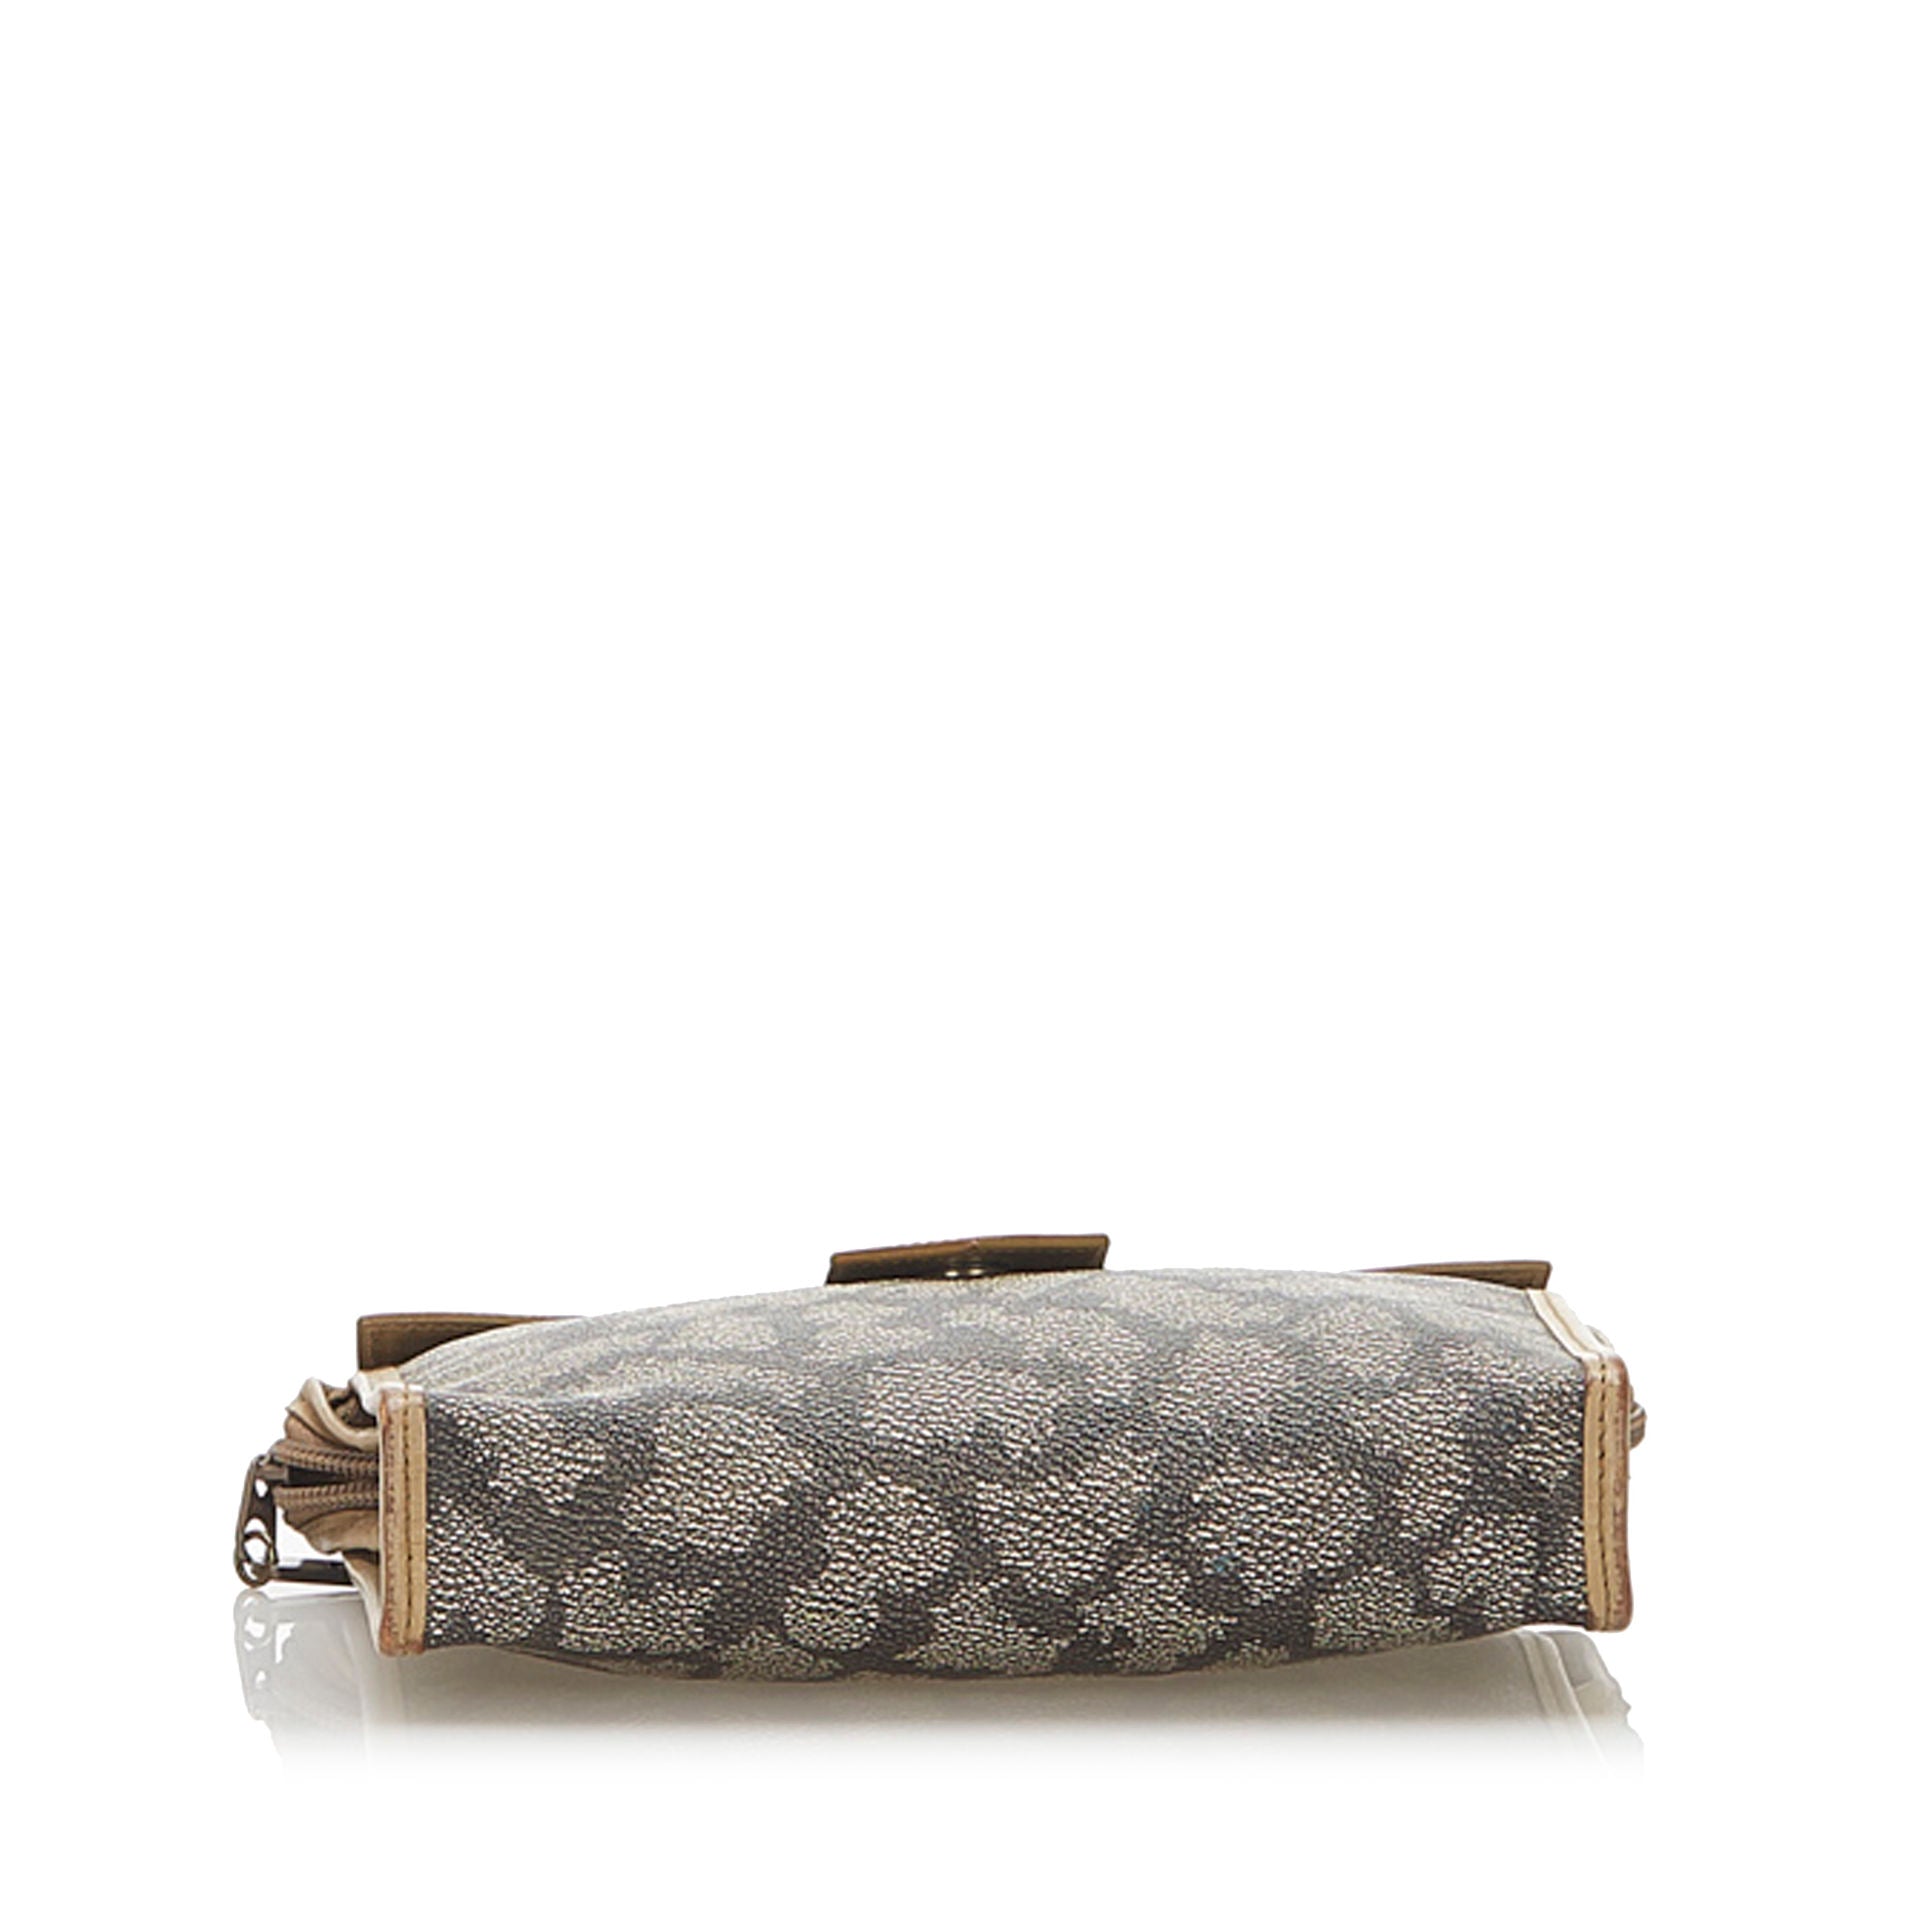 Yves Saint Laurent YSL Gray Printed Leather Clutch Bag With certificate of authenticity by Real Authentication